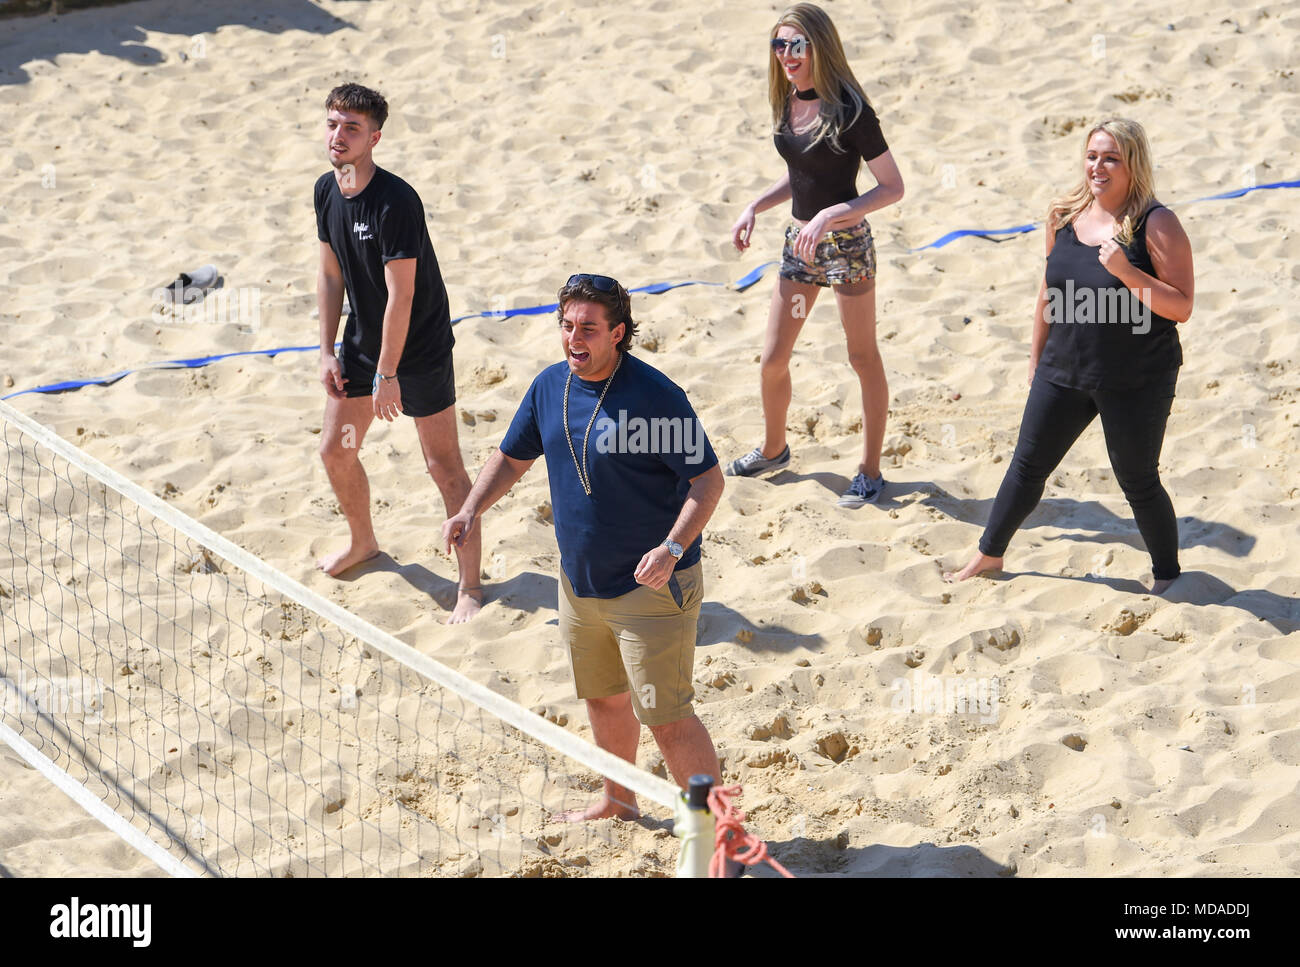 Brighton UK 19th April 2018  - James Argent known as Arg plays beach volleyball on Brighton seafront with extras from the reality television show 'The Only Way is Essex' as they enjoy the beautiful sunny weather during filming . The hot sunny weather is set to continue throughout Britain with temperatures expected to reach into the high twenties in parts of the South East Credit: Simon Dack/Alamy Live News Credit: Simon Dack/Alamy Live News Stock Photo